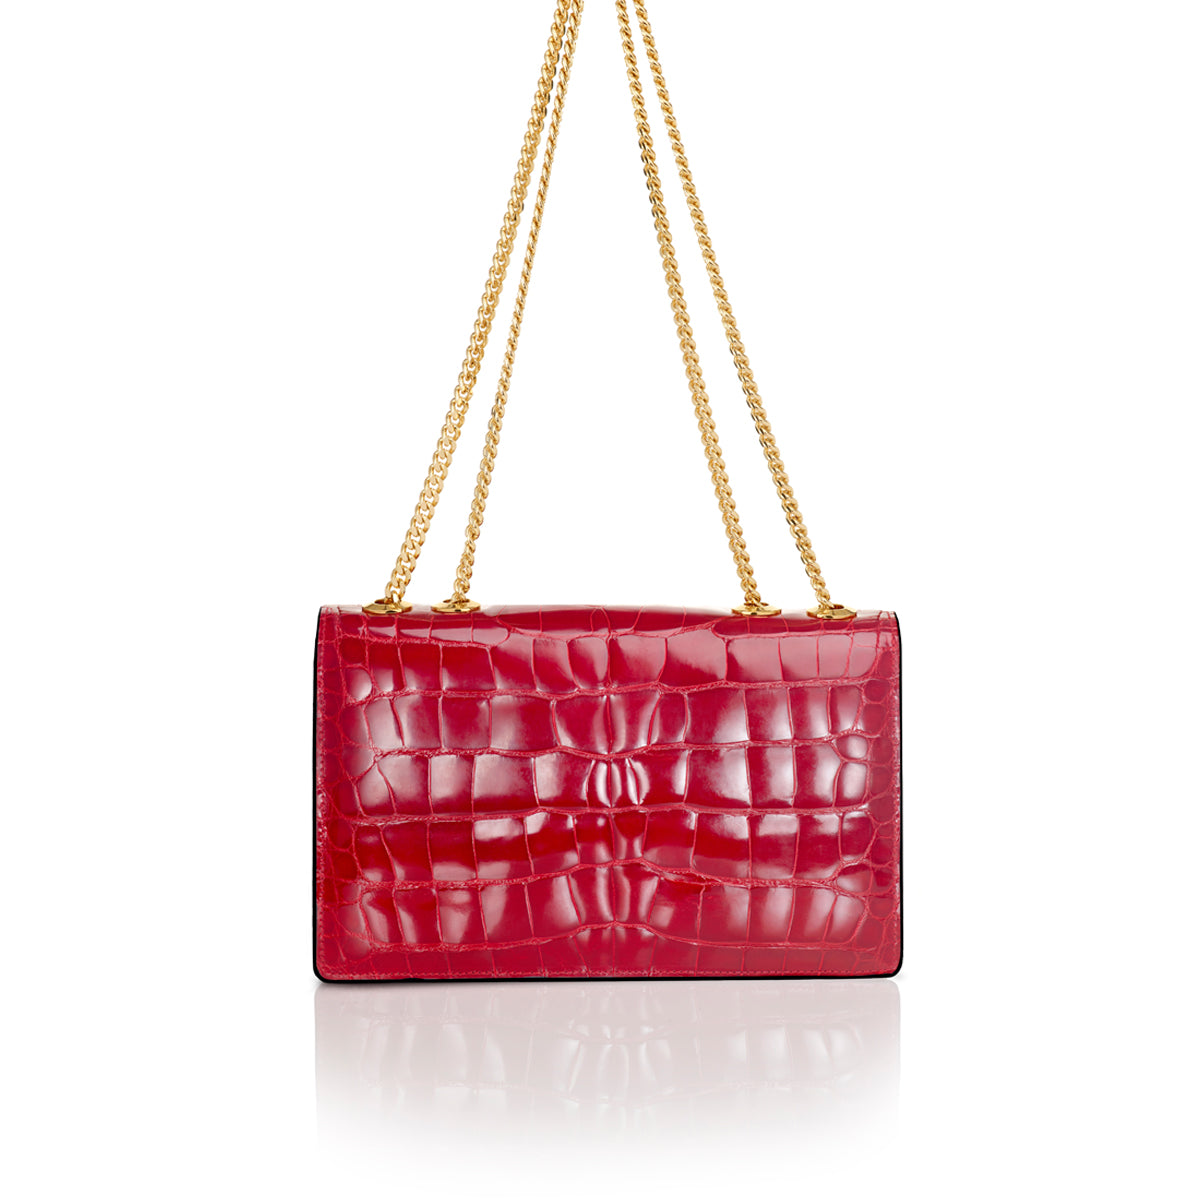 STALVEY Chained Shoulder Bag 2.5 Small in Red Alligator Front View